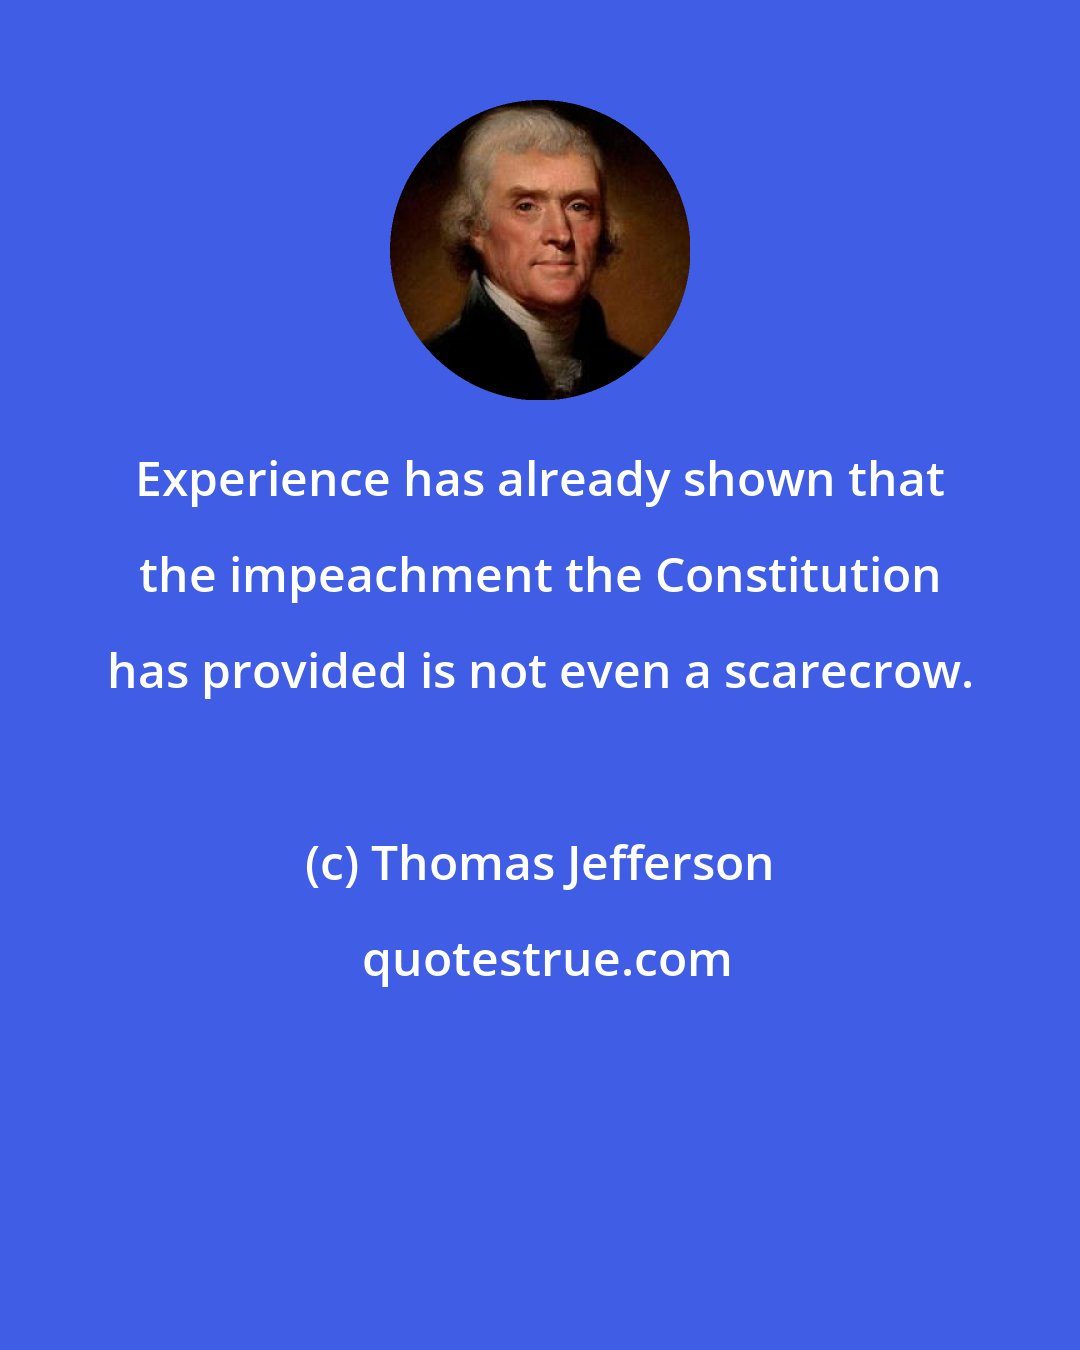 Thomas Jefferson: Experience has already shown that the impeachment the Constitution has provided is not even a scarecrow.